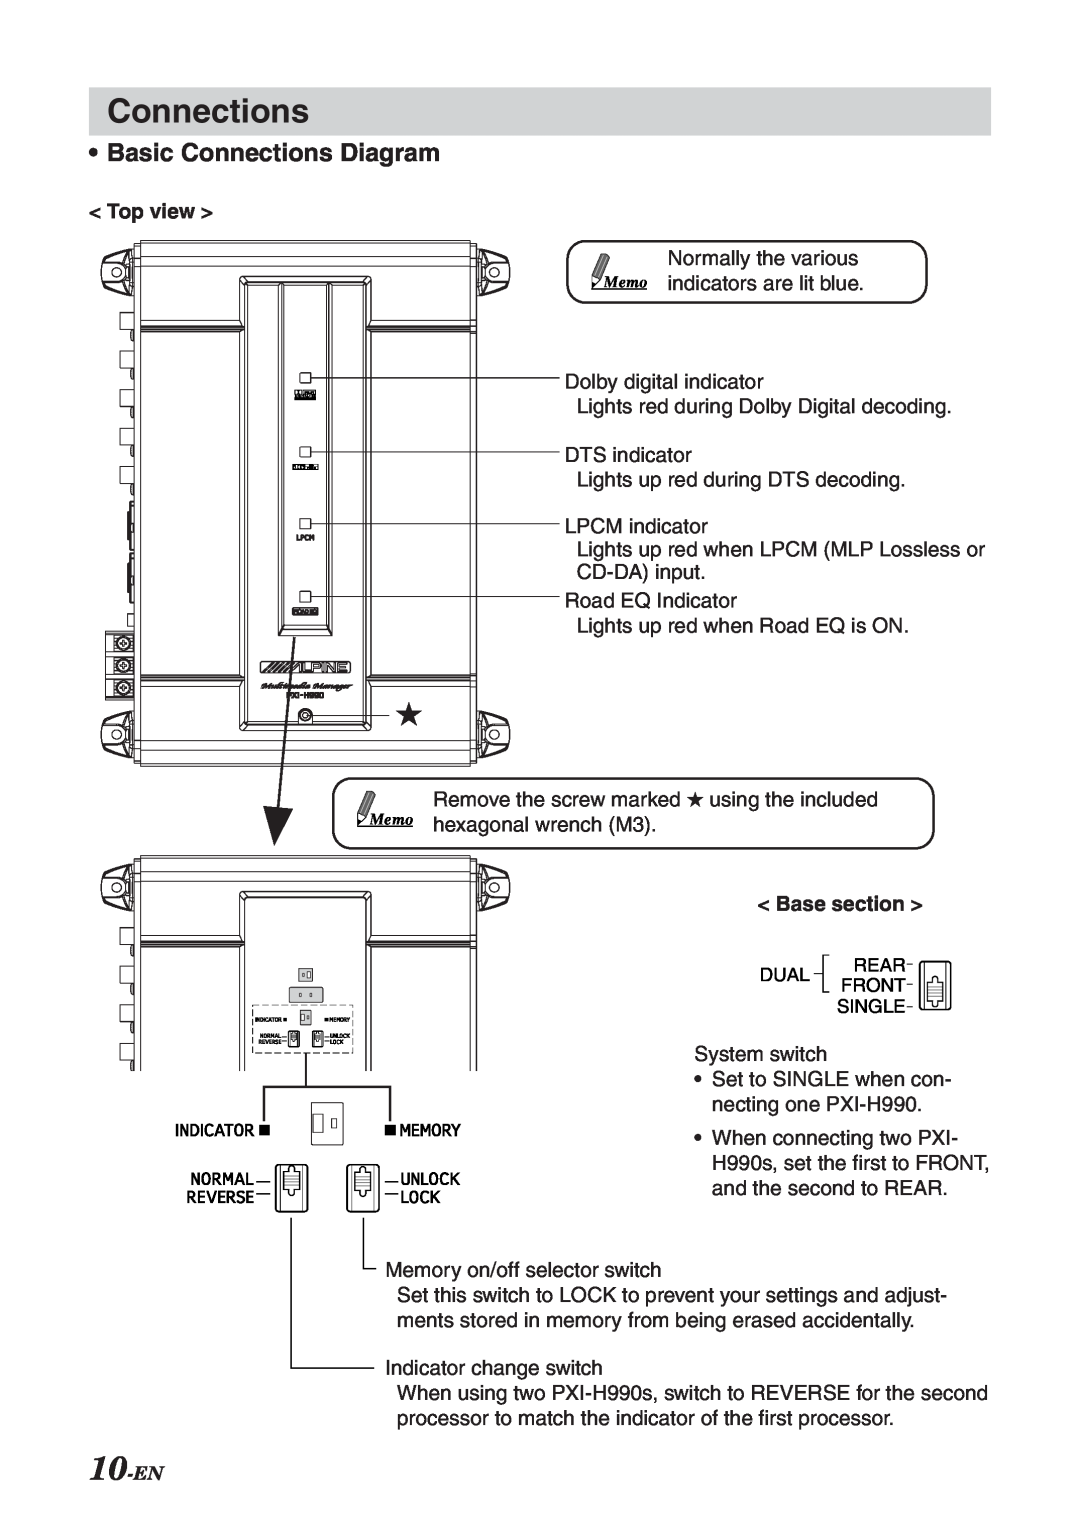 Alpine PXI-H990 manual Basic Connections Diagram, Top view, < Base section > 